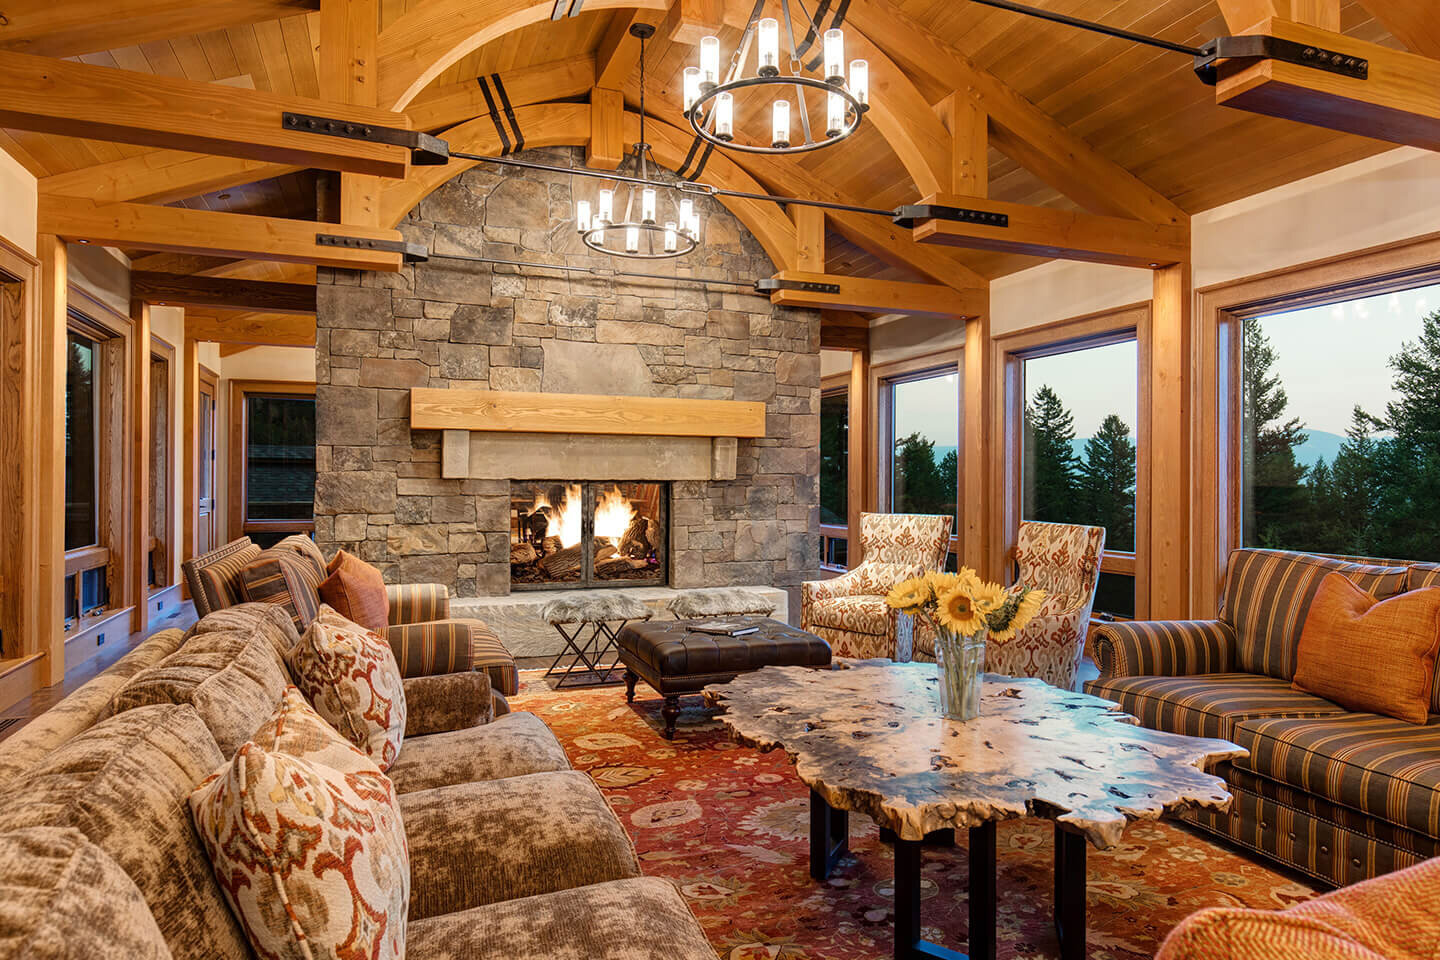 Living room with stone fireplace and arched trusses